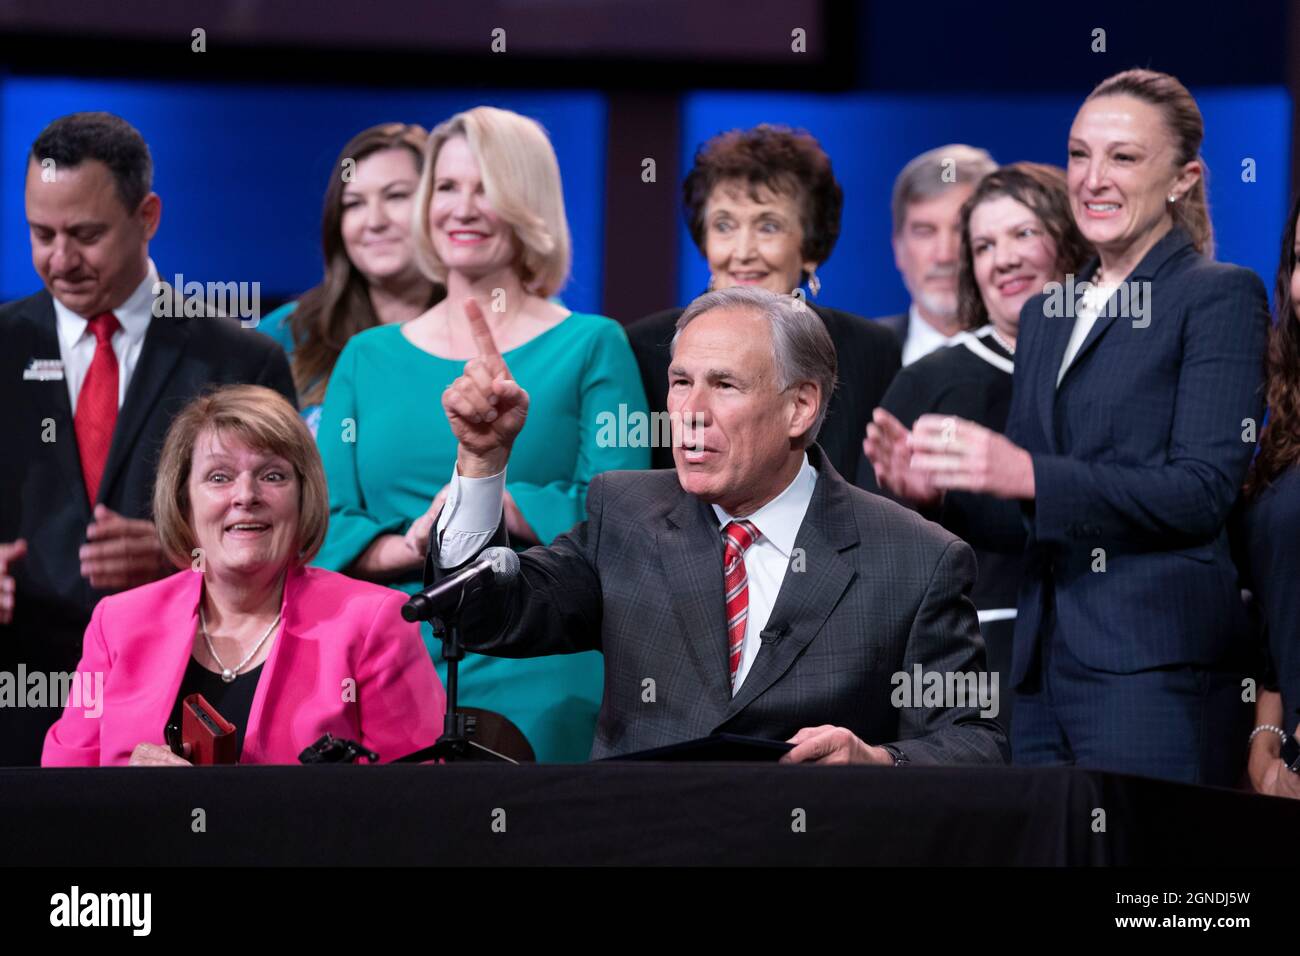 Austin, Texas, USA. 24th Sep, 2021. Calling it 'the icing on the cake', Texas Gov. GREG ABBOTT poses for pictures after signing a bill further restricting abortions in Texas. The bill outlaws mail-order abortion drugs in Texas. Abbott spoke at the Texas Faith, Family & Freedom Forum at an Austin church. Credit: Bob Daemmrich/Alamy Live News Credit: Bob Daemmrich/Alamy Live News Stock Photo